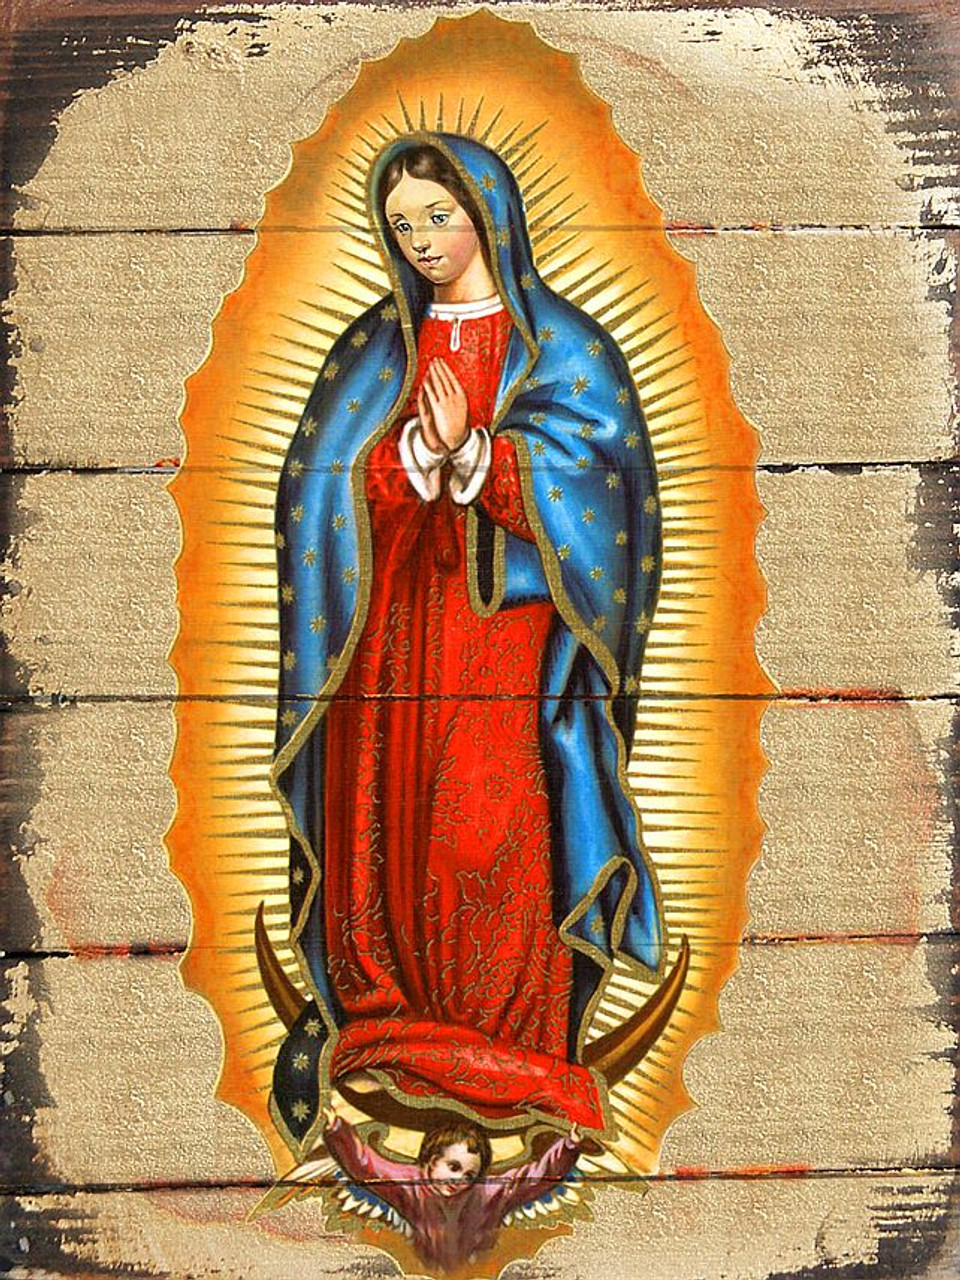 Our Lady Of Guadalupe Symbols